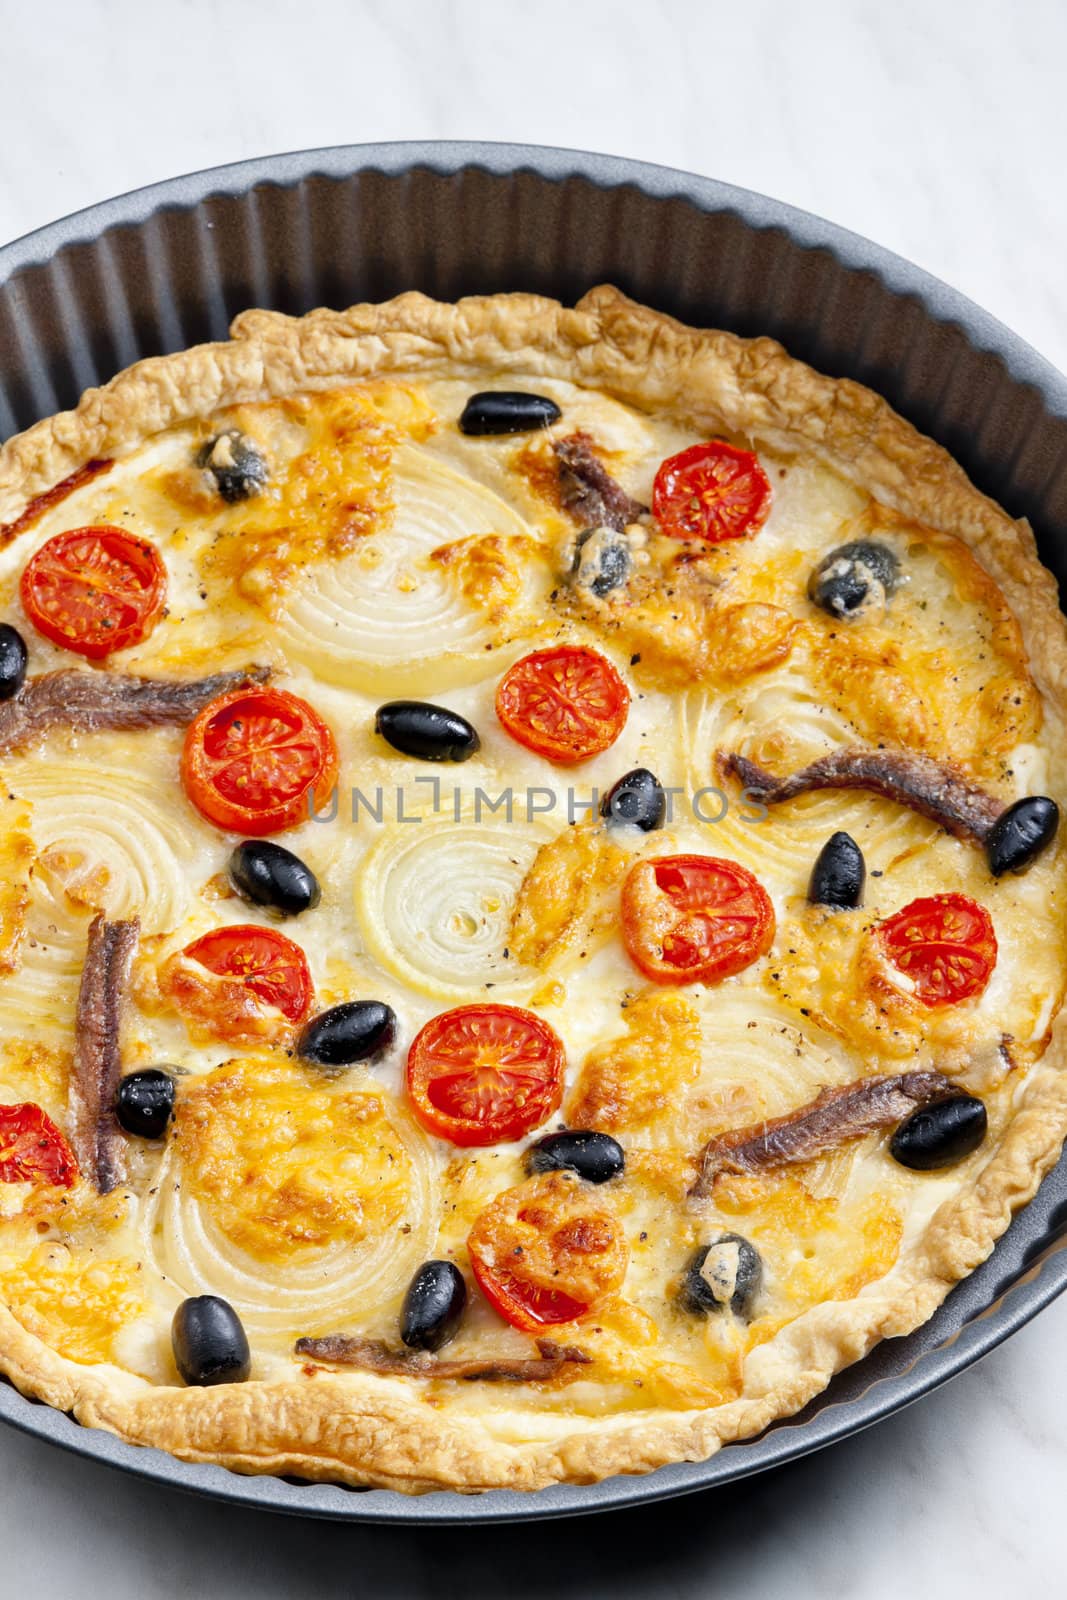 cake with anchovies, cherry tomatoes and black olives